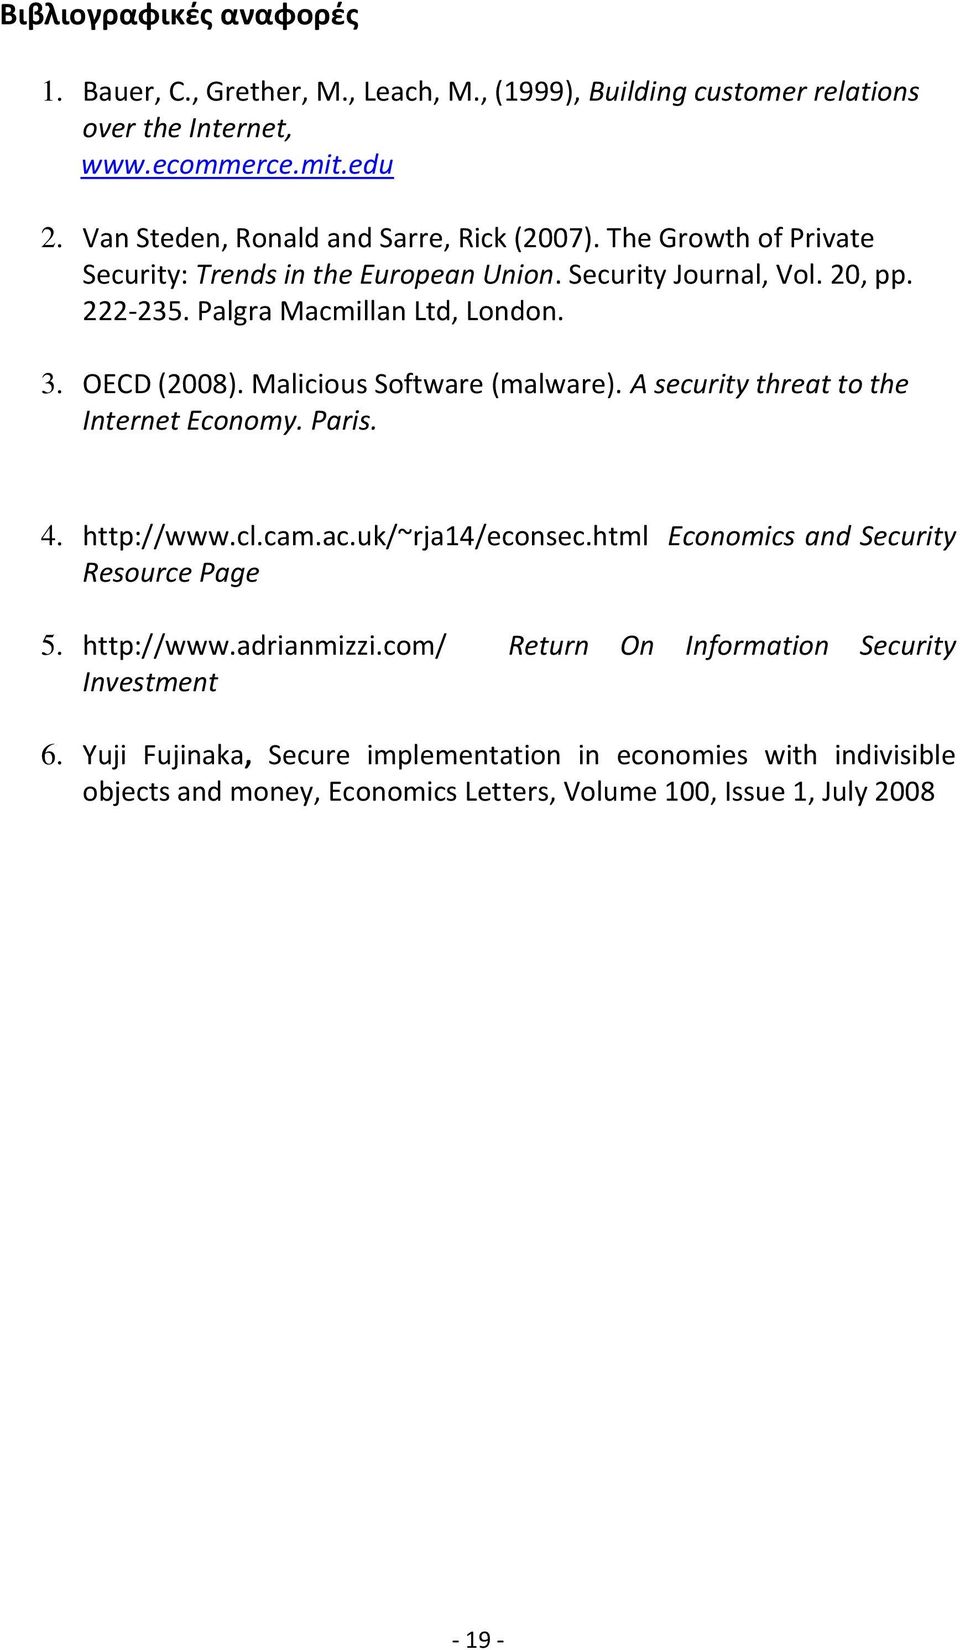 OECD (2008). Malicious Software (malware). A security threat to the Internet Economy. Paris. 4. http://www.cl.cam.ac.uk/~rja14/econsec.html Economics and Security Resource Page 5.